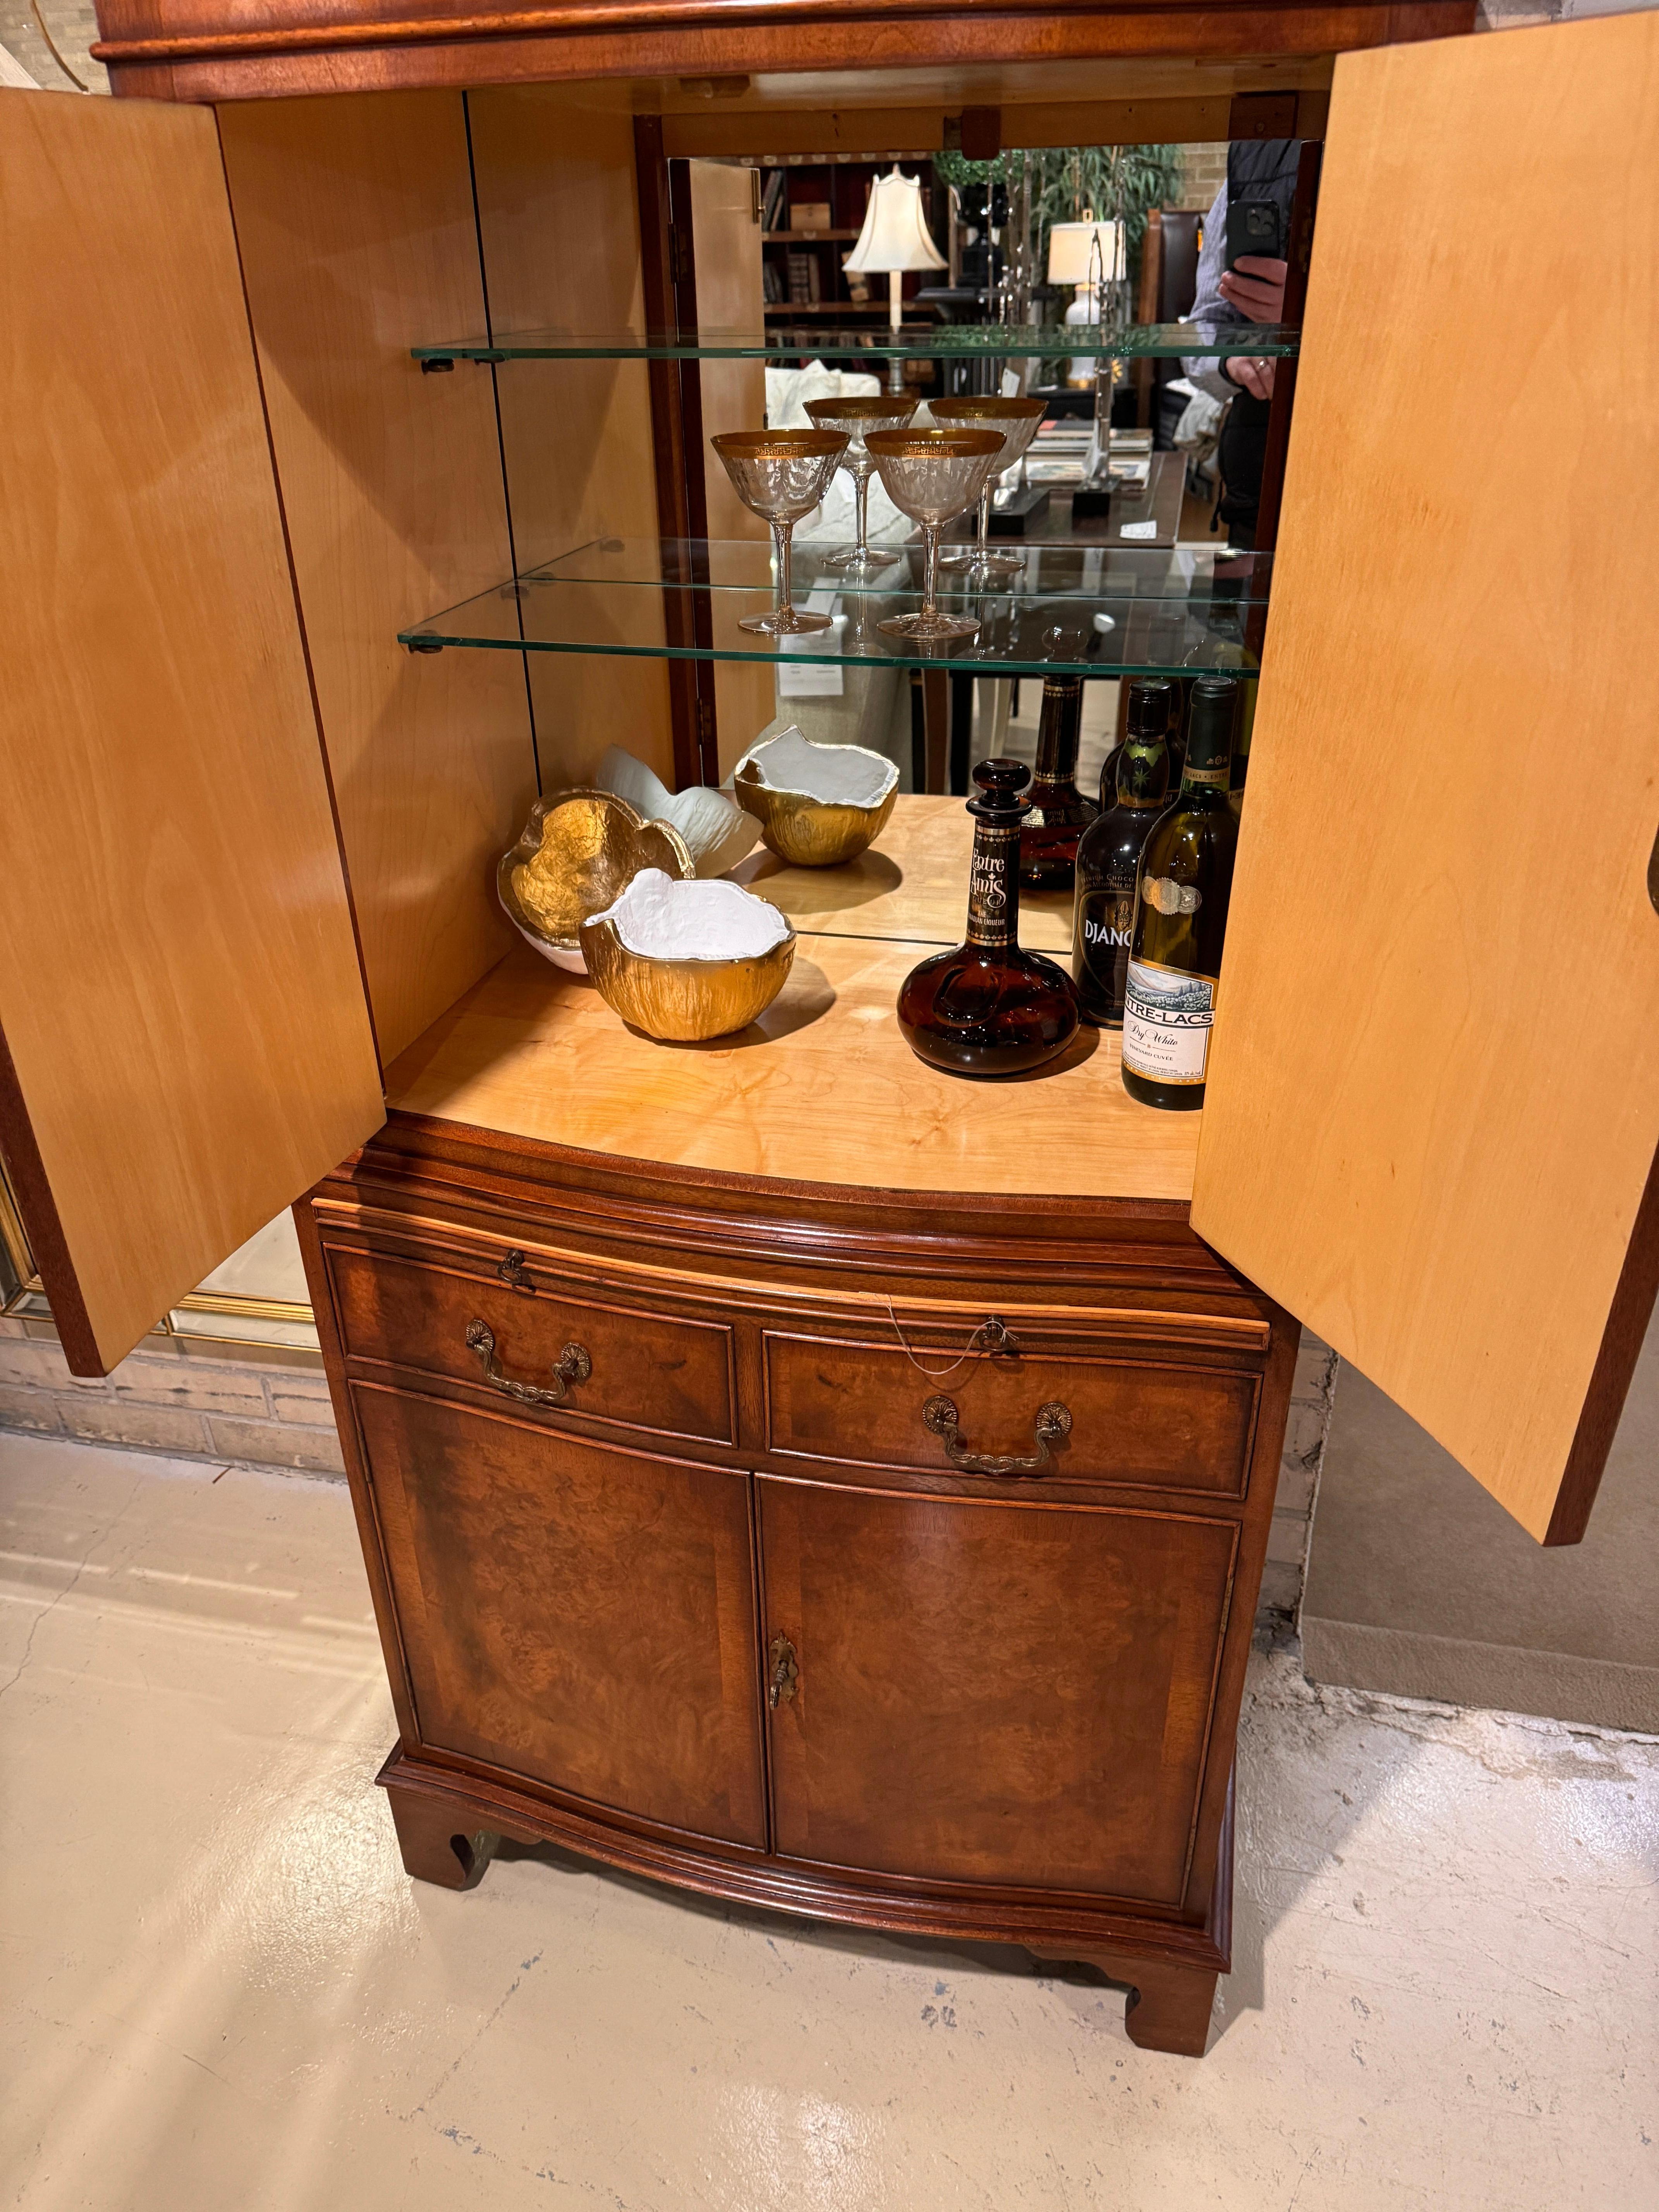 This is an absolutely fantastic example of an 18th Century Style drinks cabinet or dry bar crafted in England with meticulous attention to detail.  The cabinet is in Walnut solids and veneer and a showstopper of Burr Walnut veneers on the door and